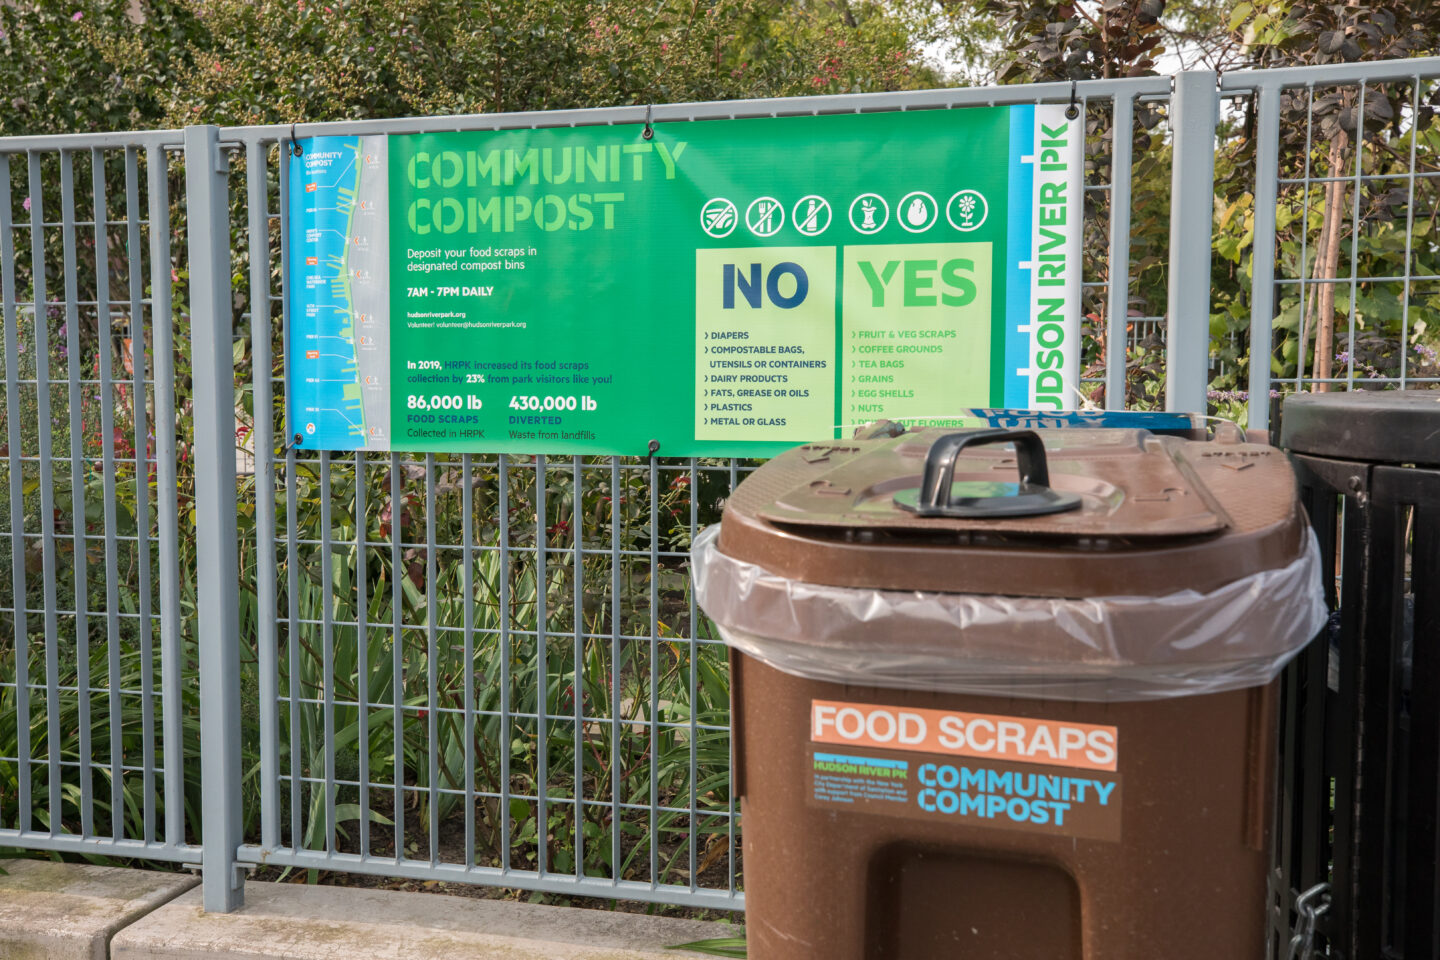 A compost drop-off container in front of a sign that provides instructions for composting